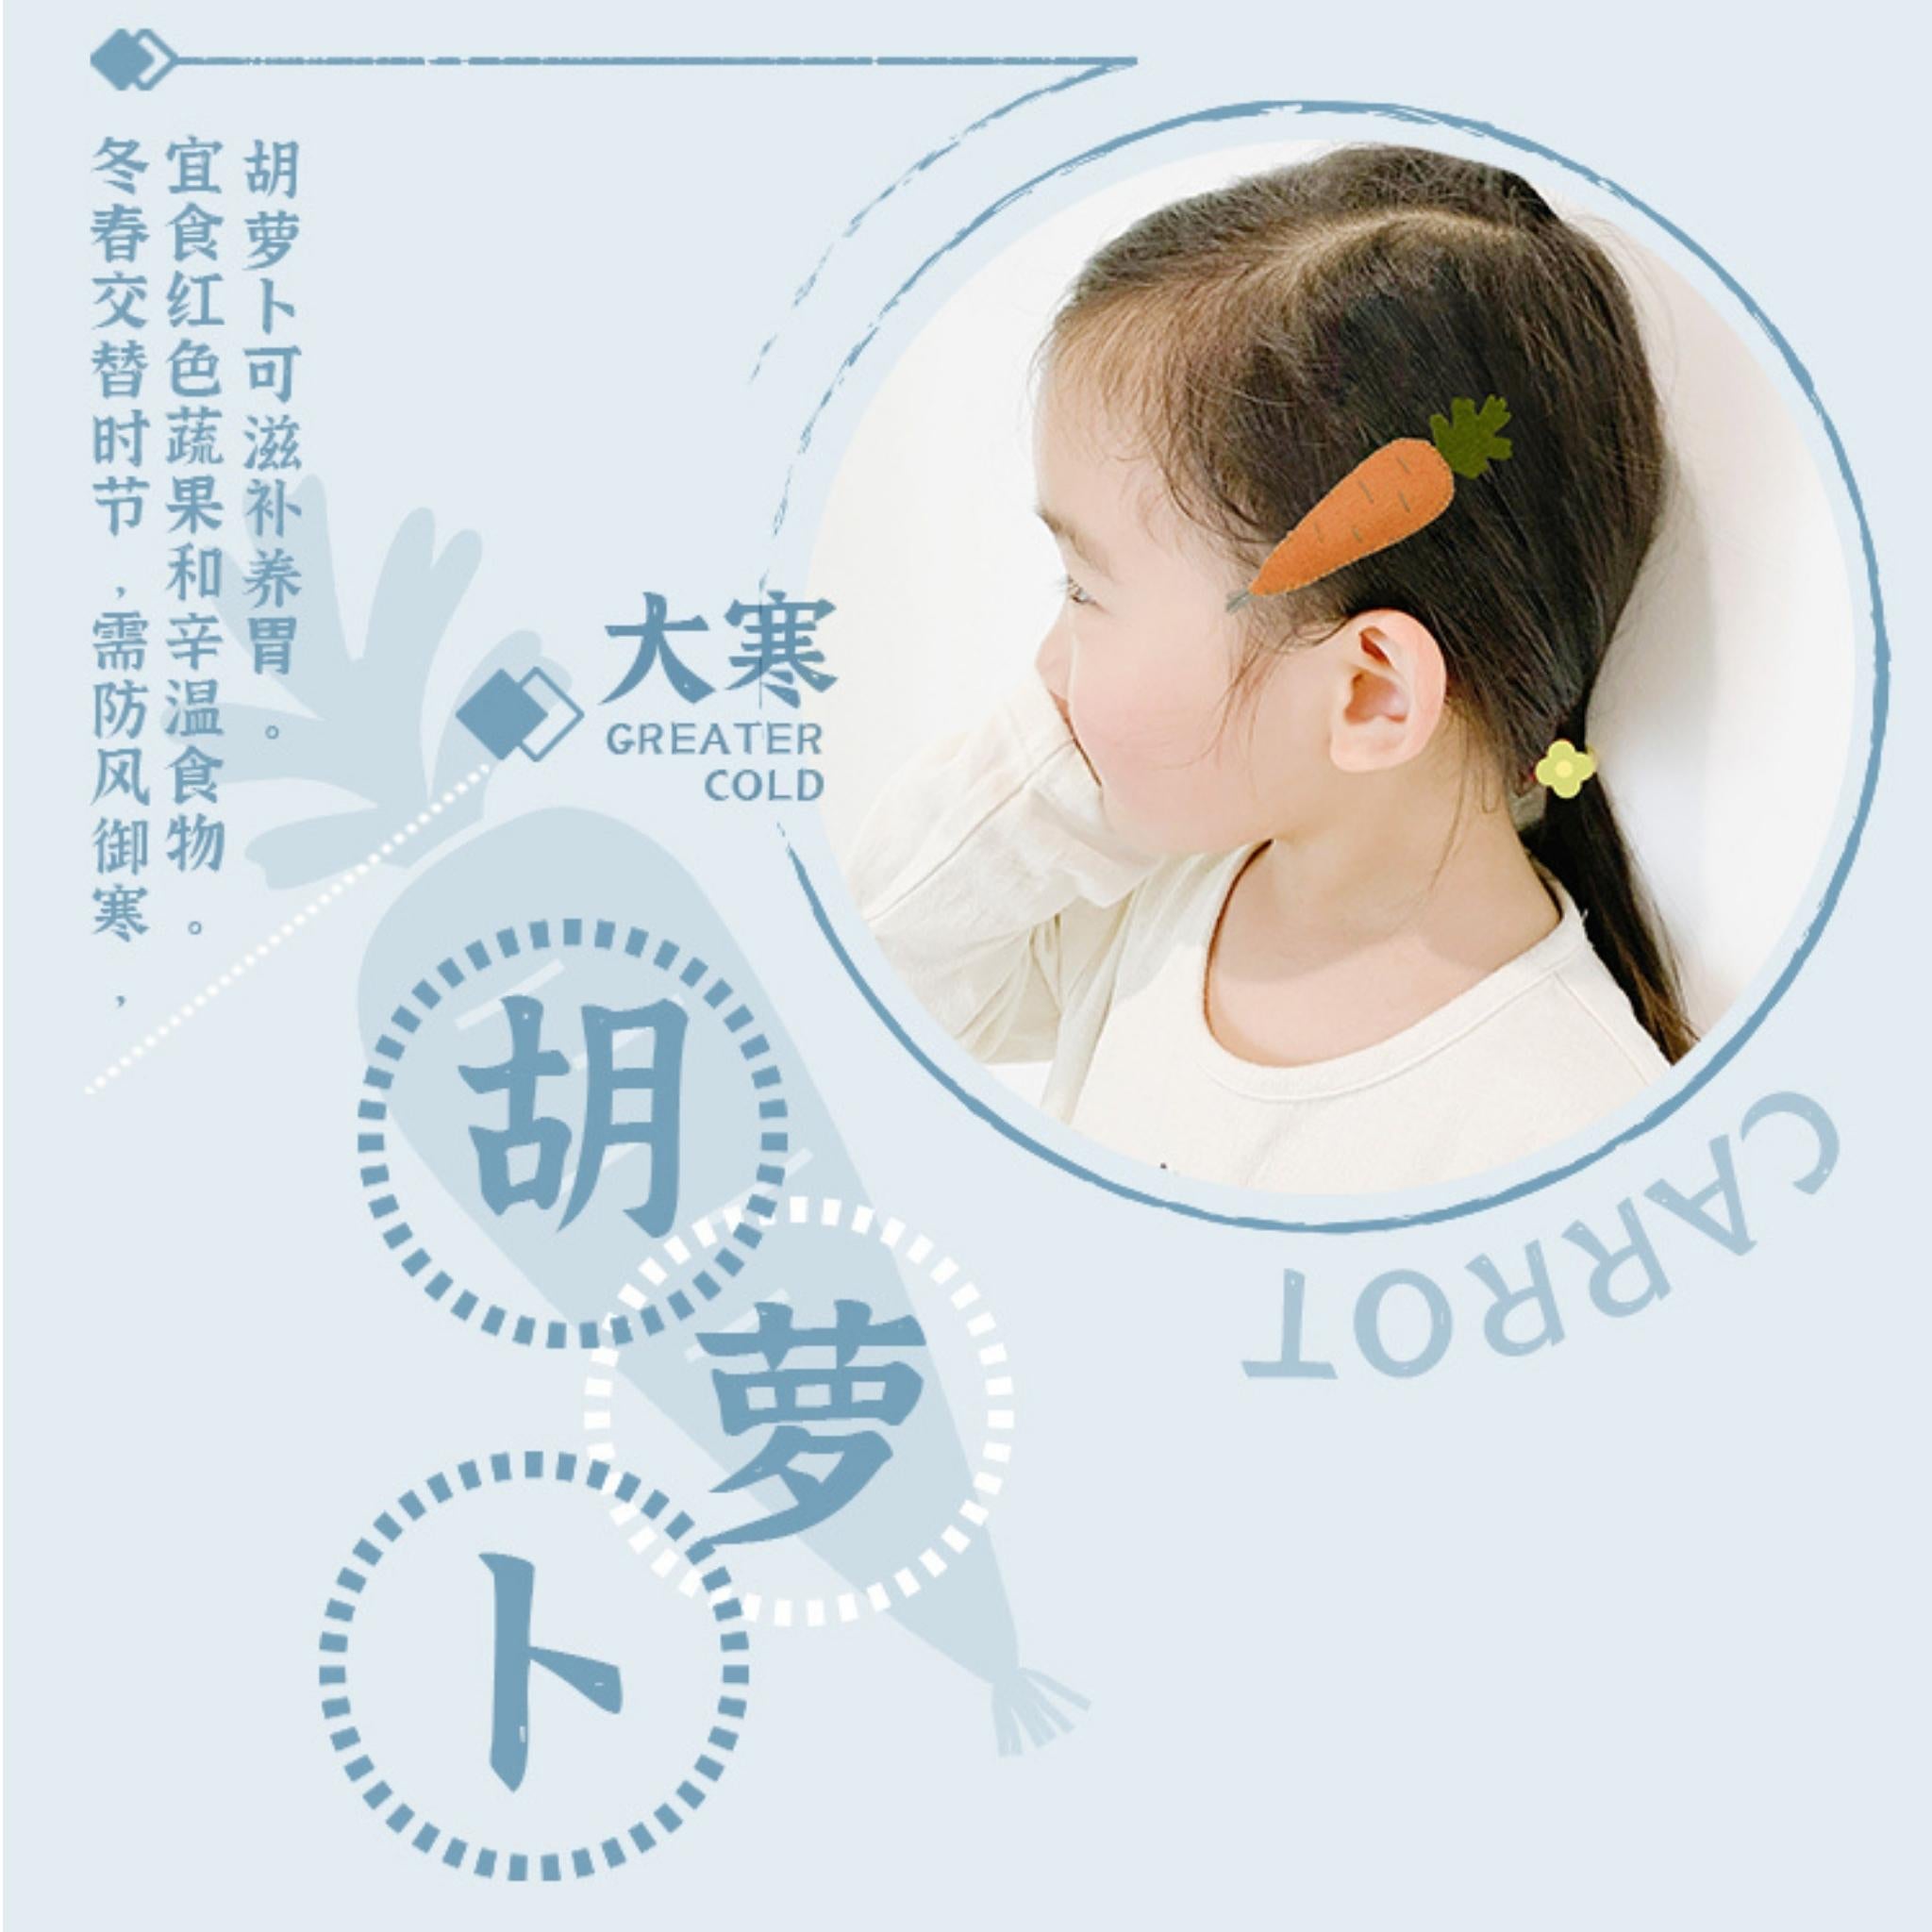 24 Solar Terms Kids Hair Accessories (WINTER 冬)